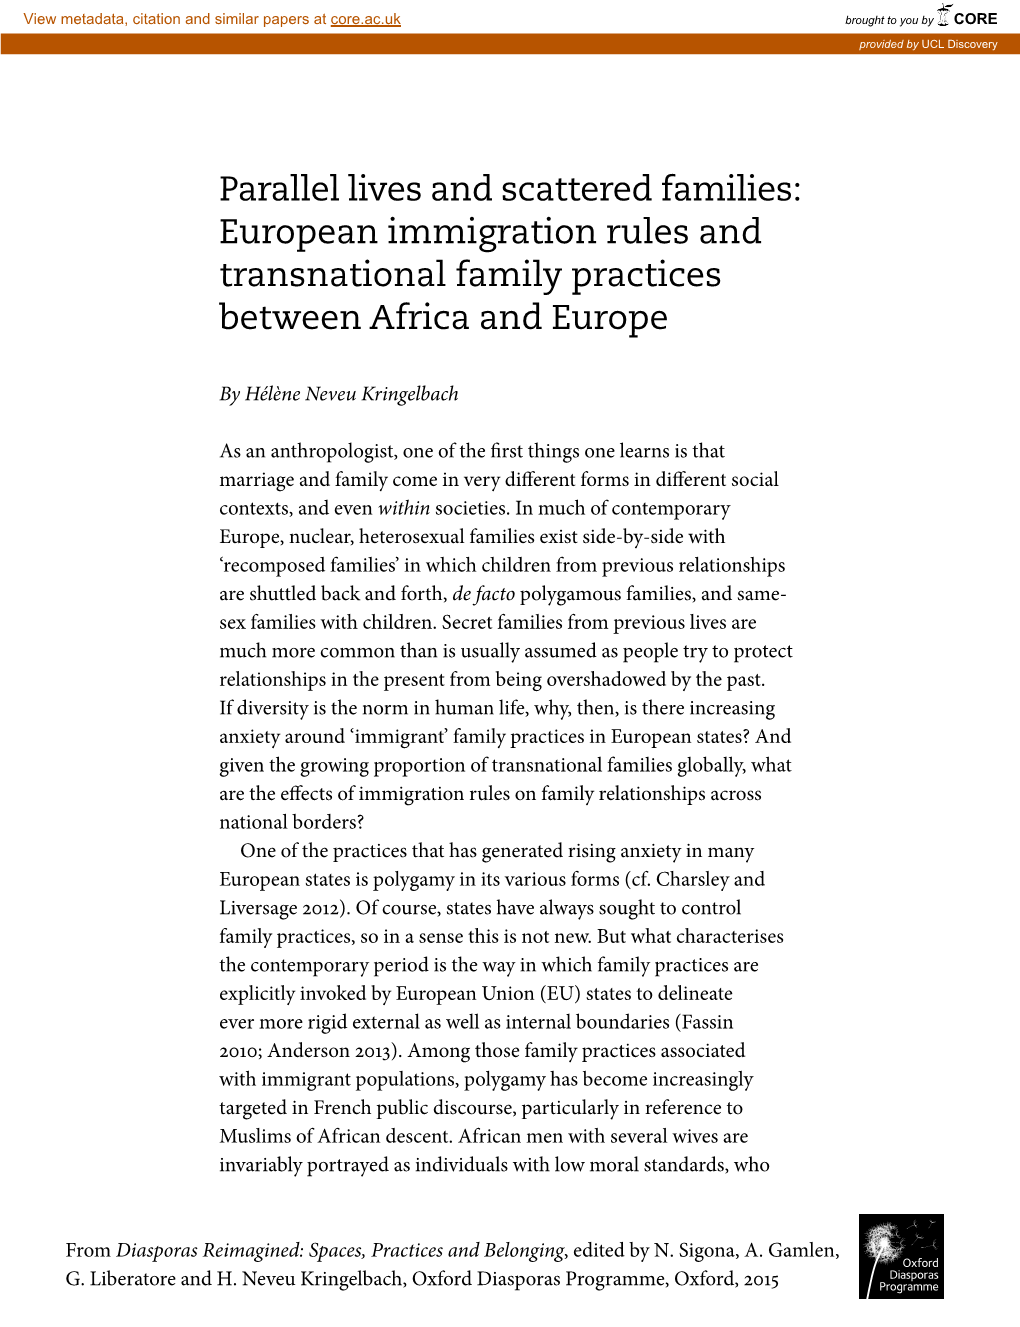 European Immigration Rules and Transnational Family Practices Between Africa and Europe